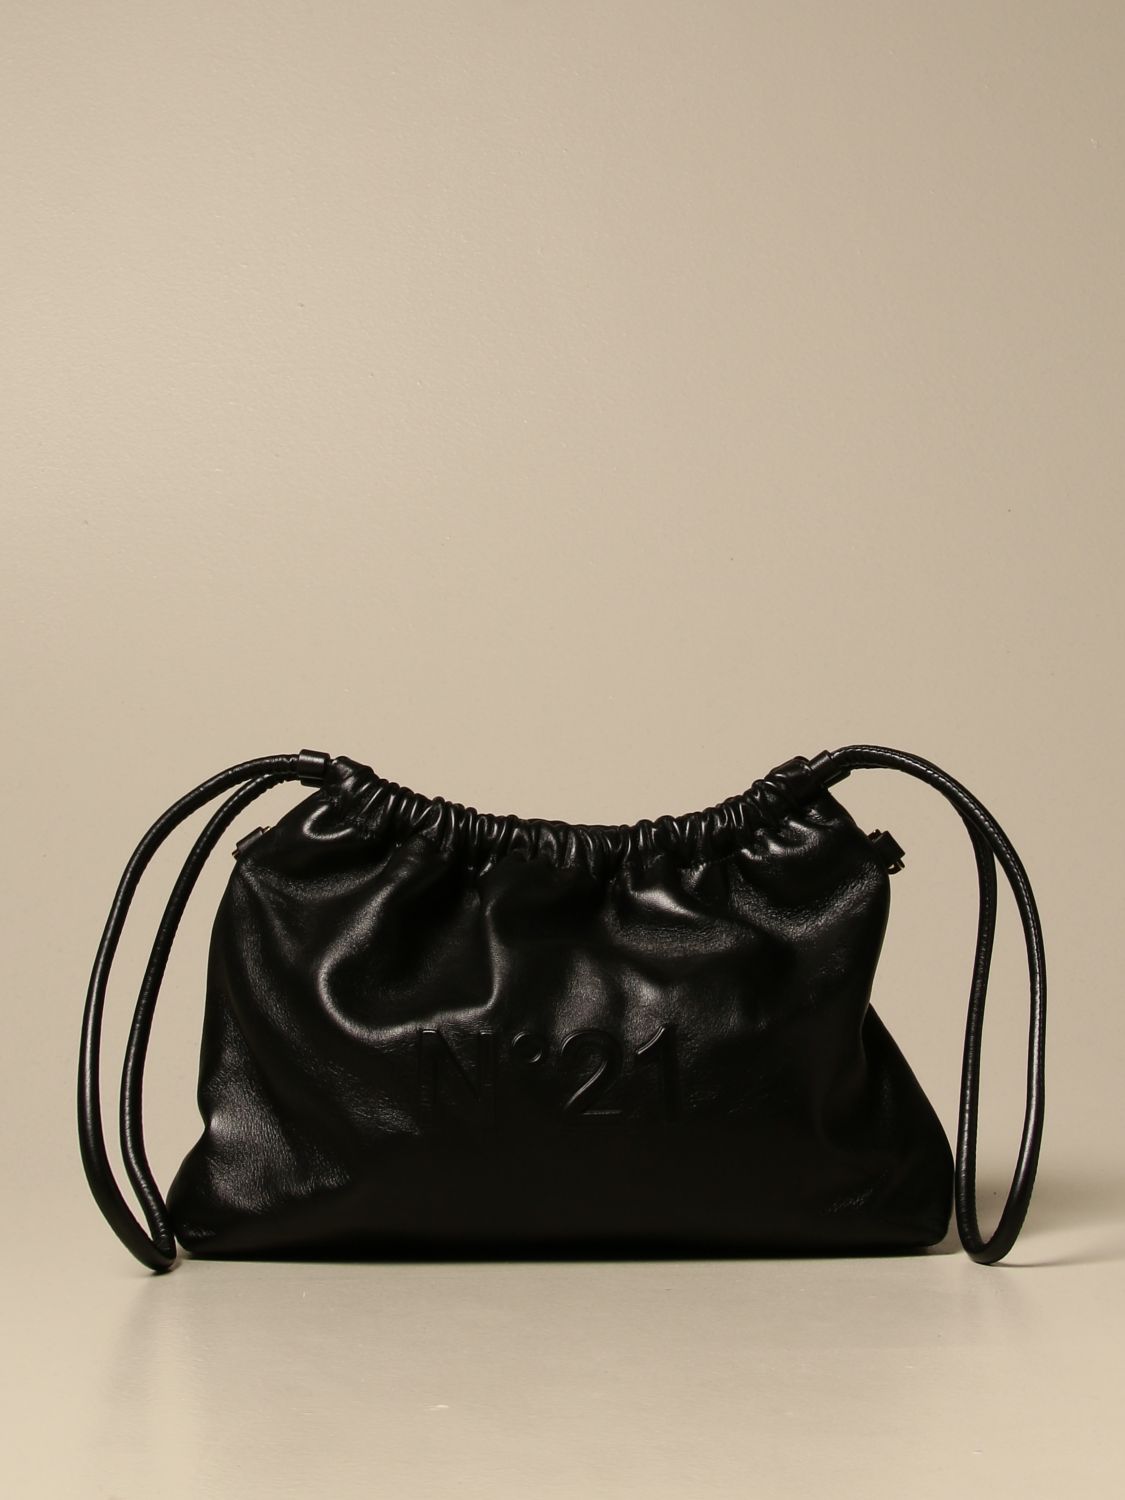 A.P.C. Eva Leather Clutch Bag With Strap in Black